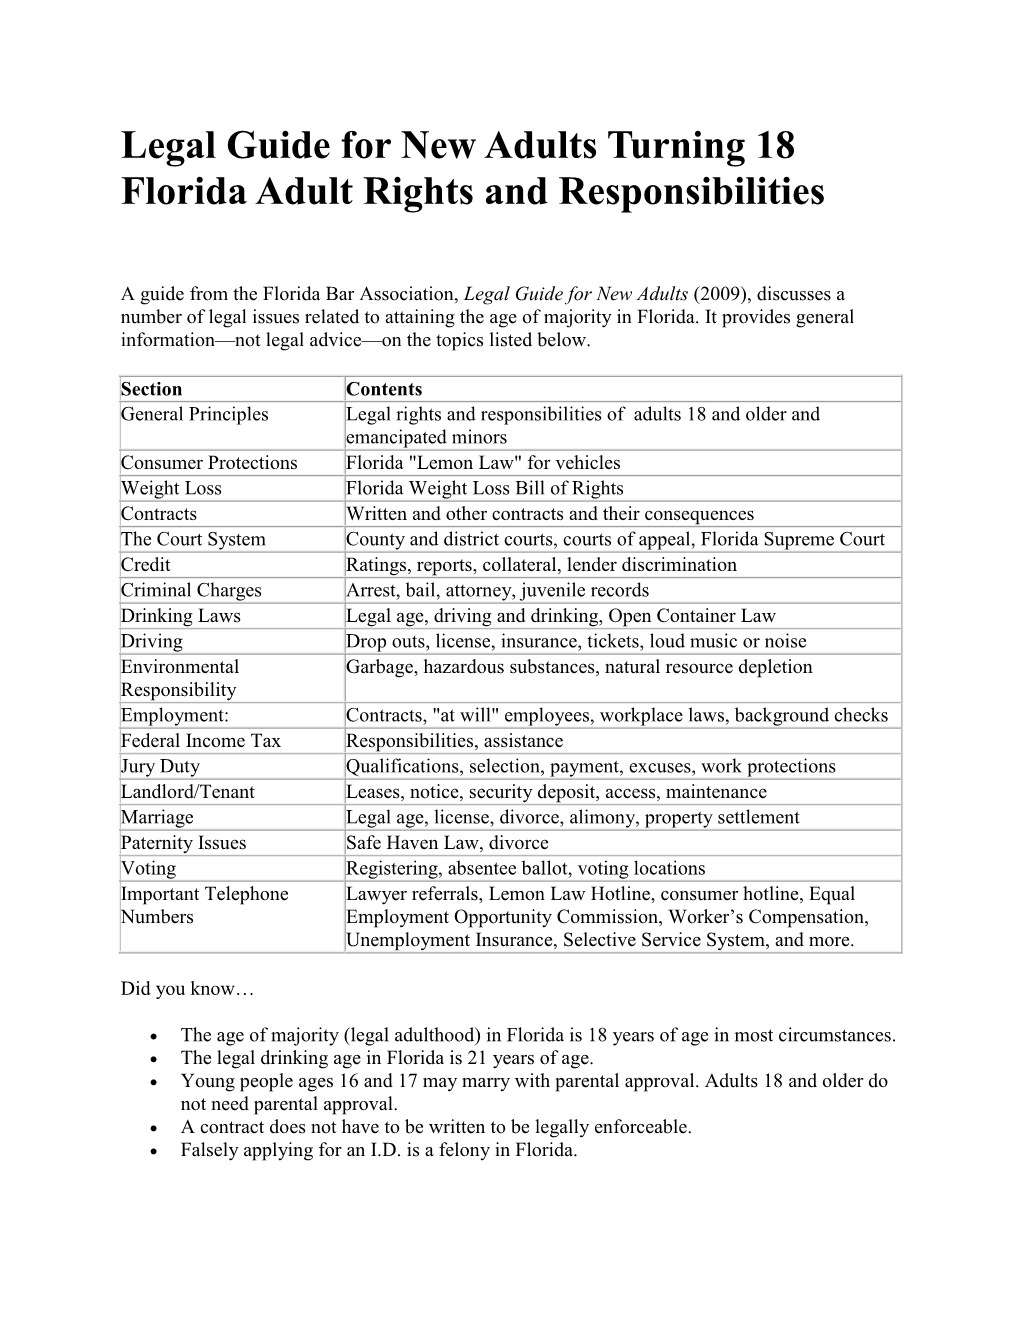 Legal Guide for New Adults Turning 18 Florida Adult Rights and Responsibilities